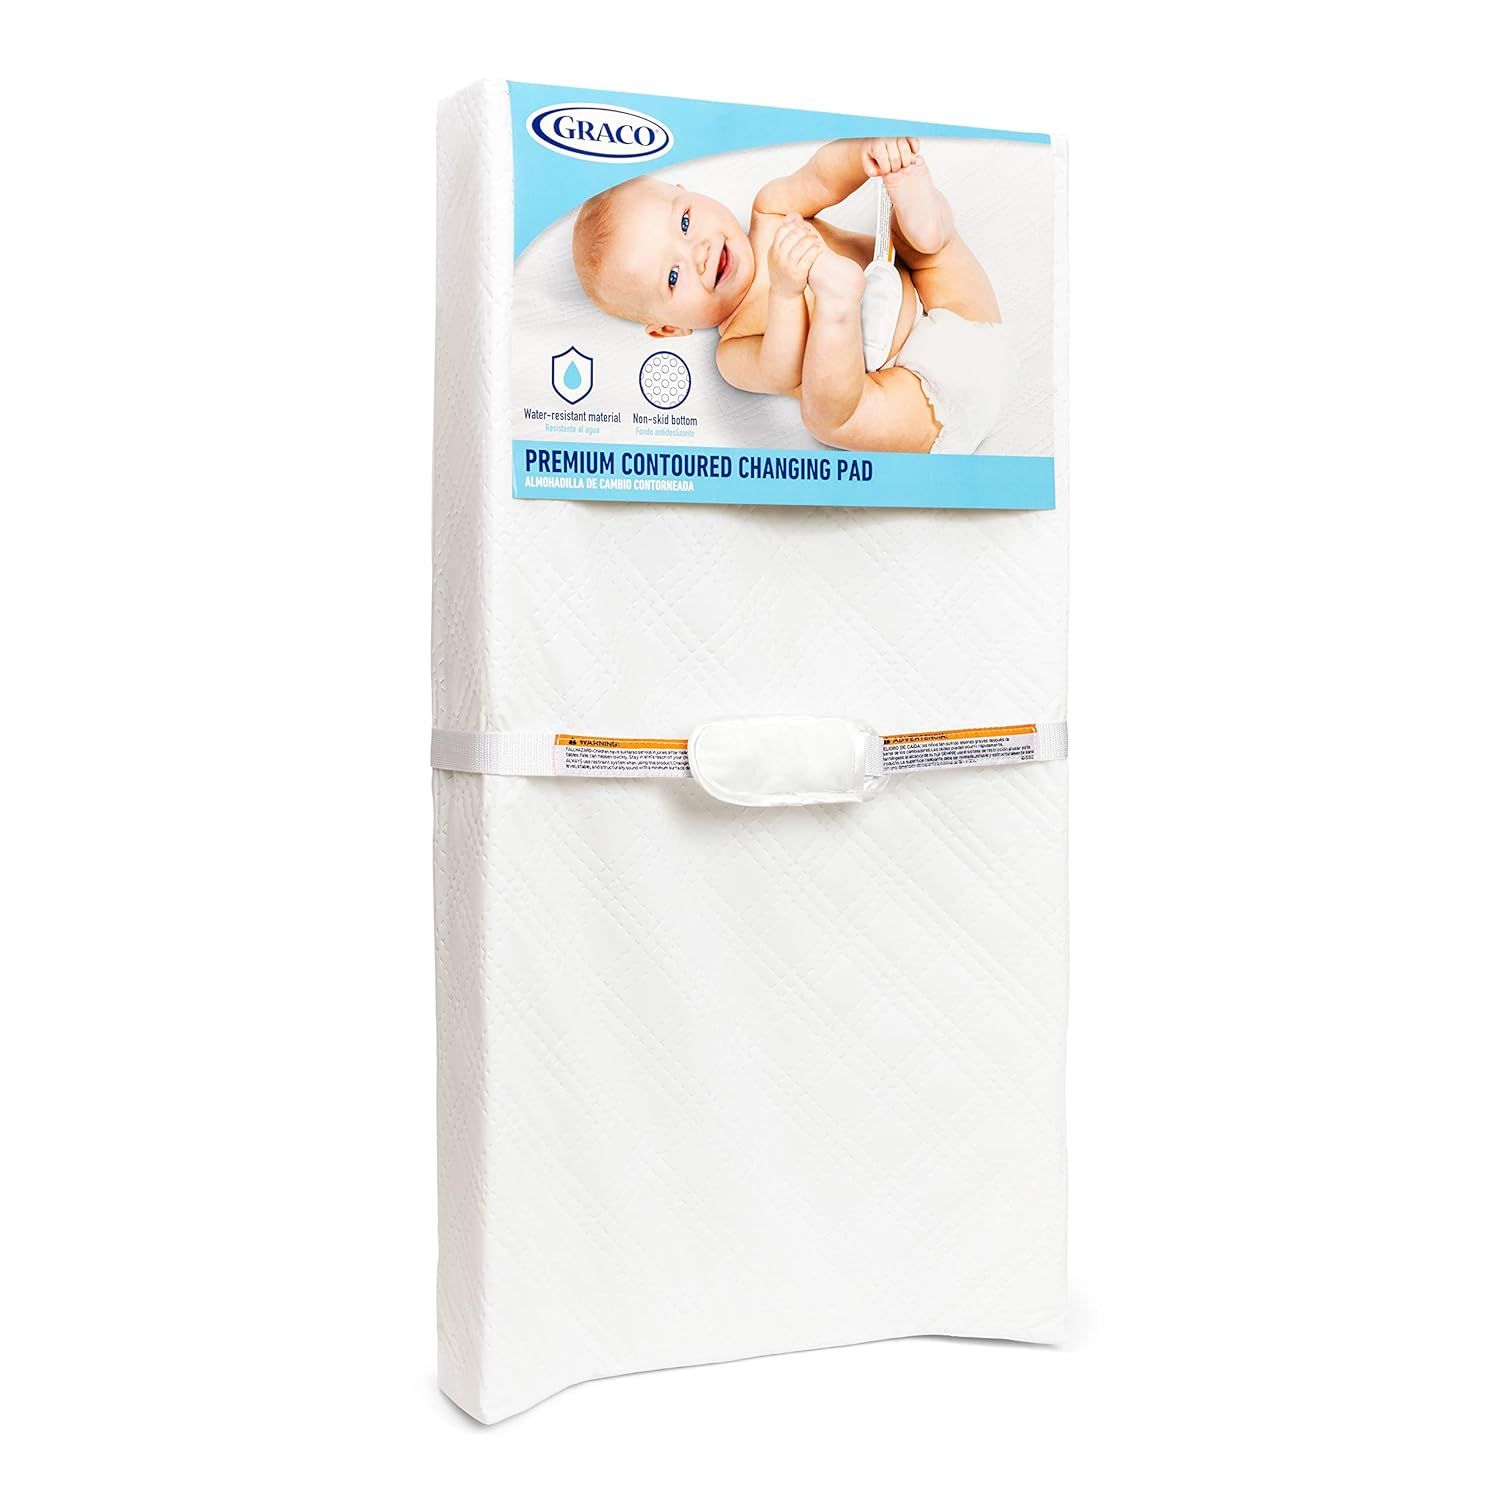 Graco Premium Contoured Changing Pad – GREENGUARD Gold Certified, Water-Resistant, Ultra-Soft B... | Amazon (US)